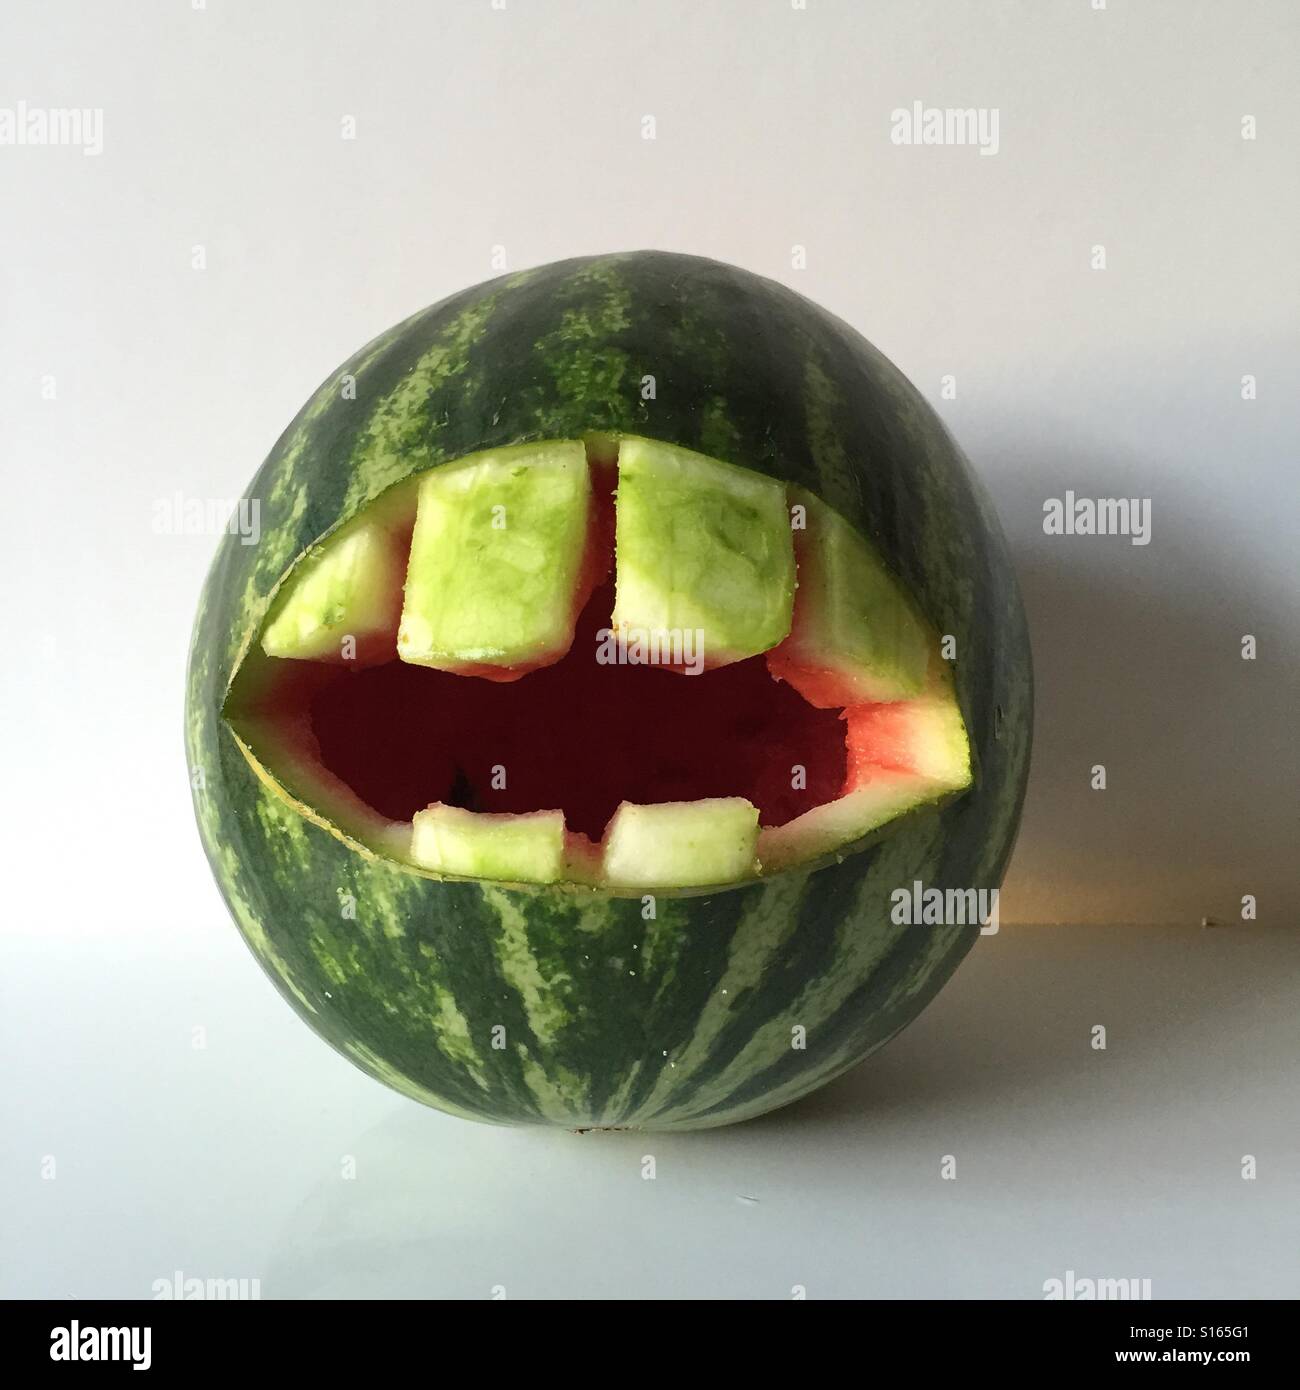 Watermelon carving Stock Photo